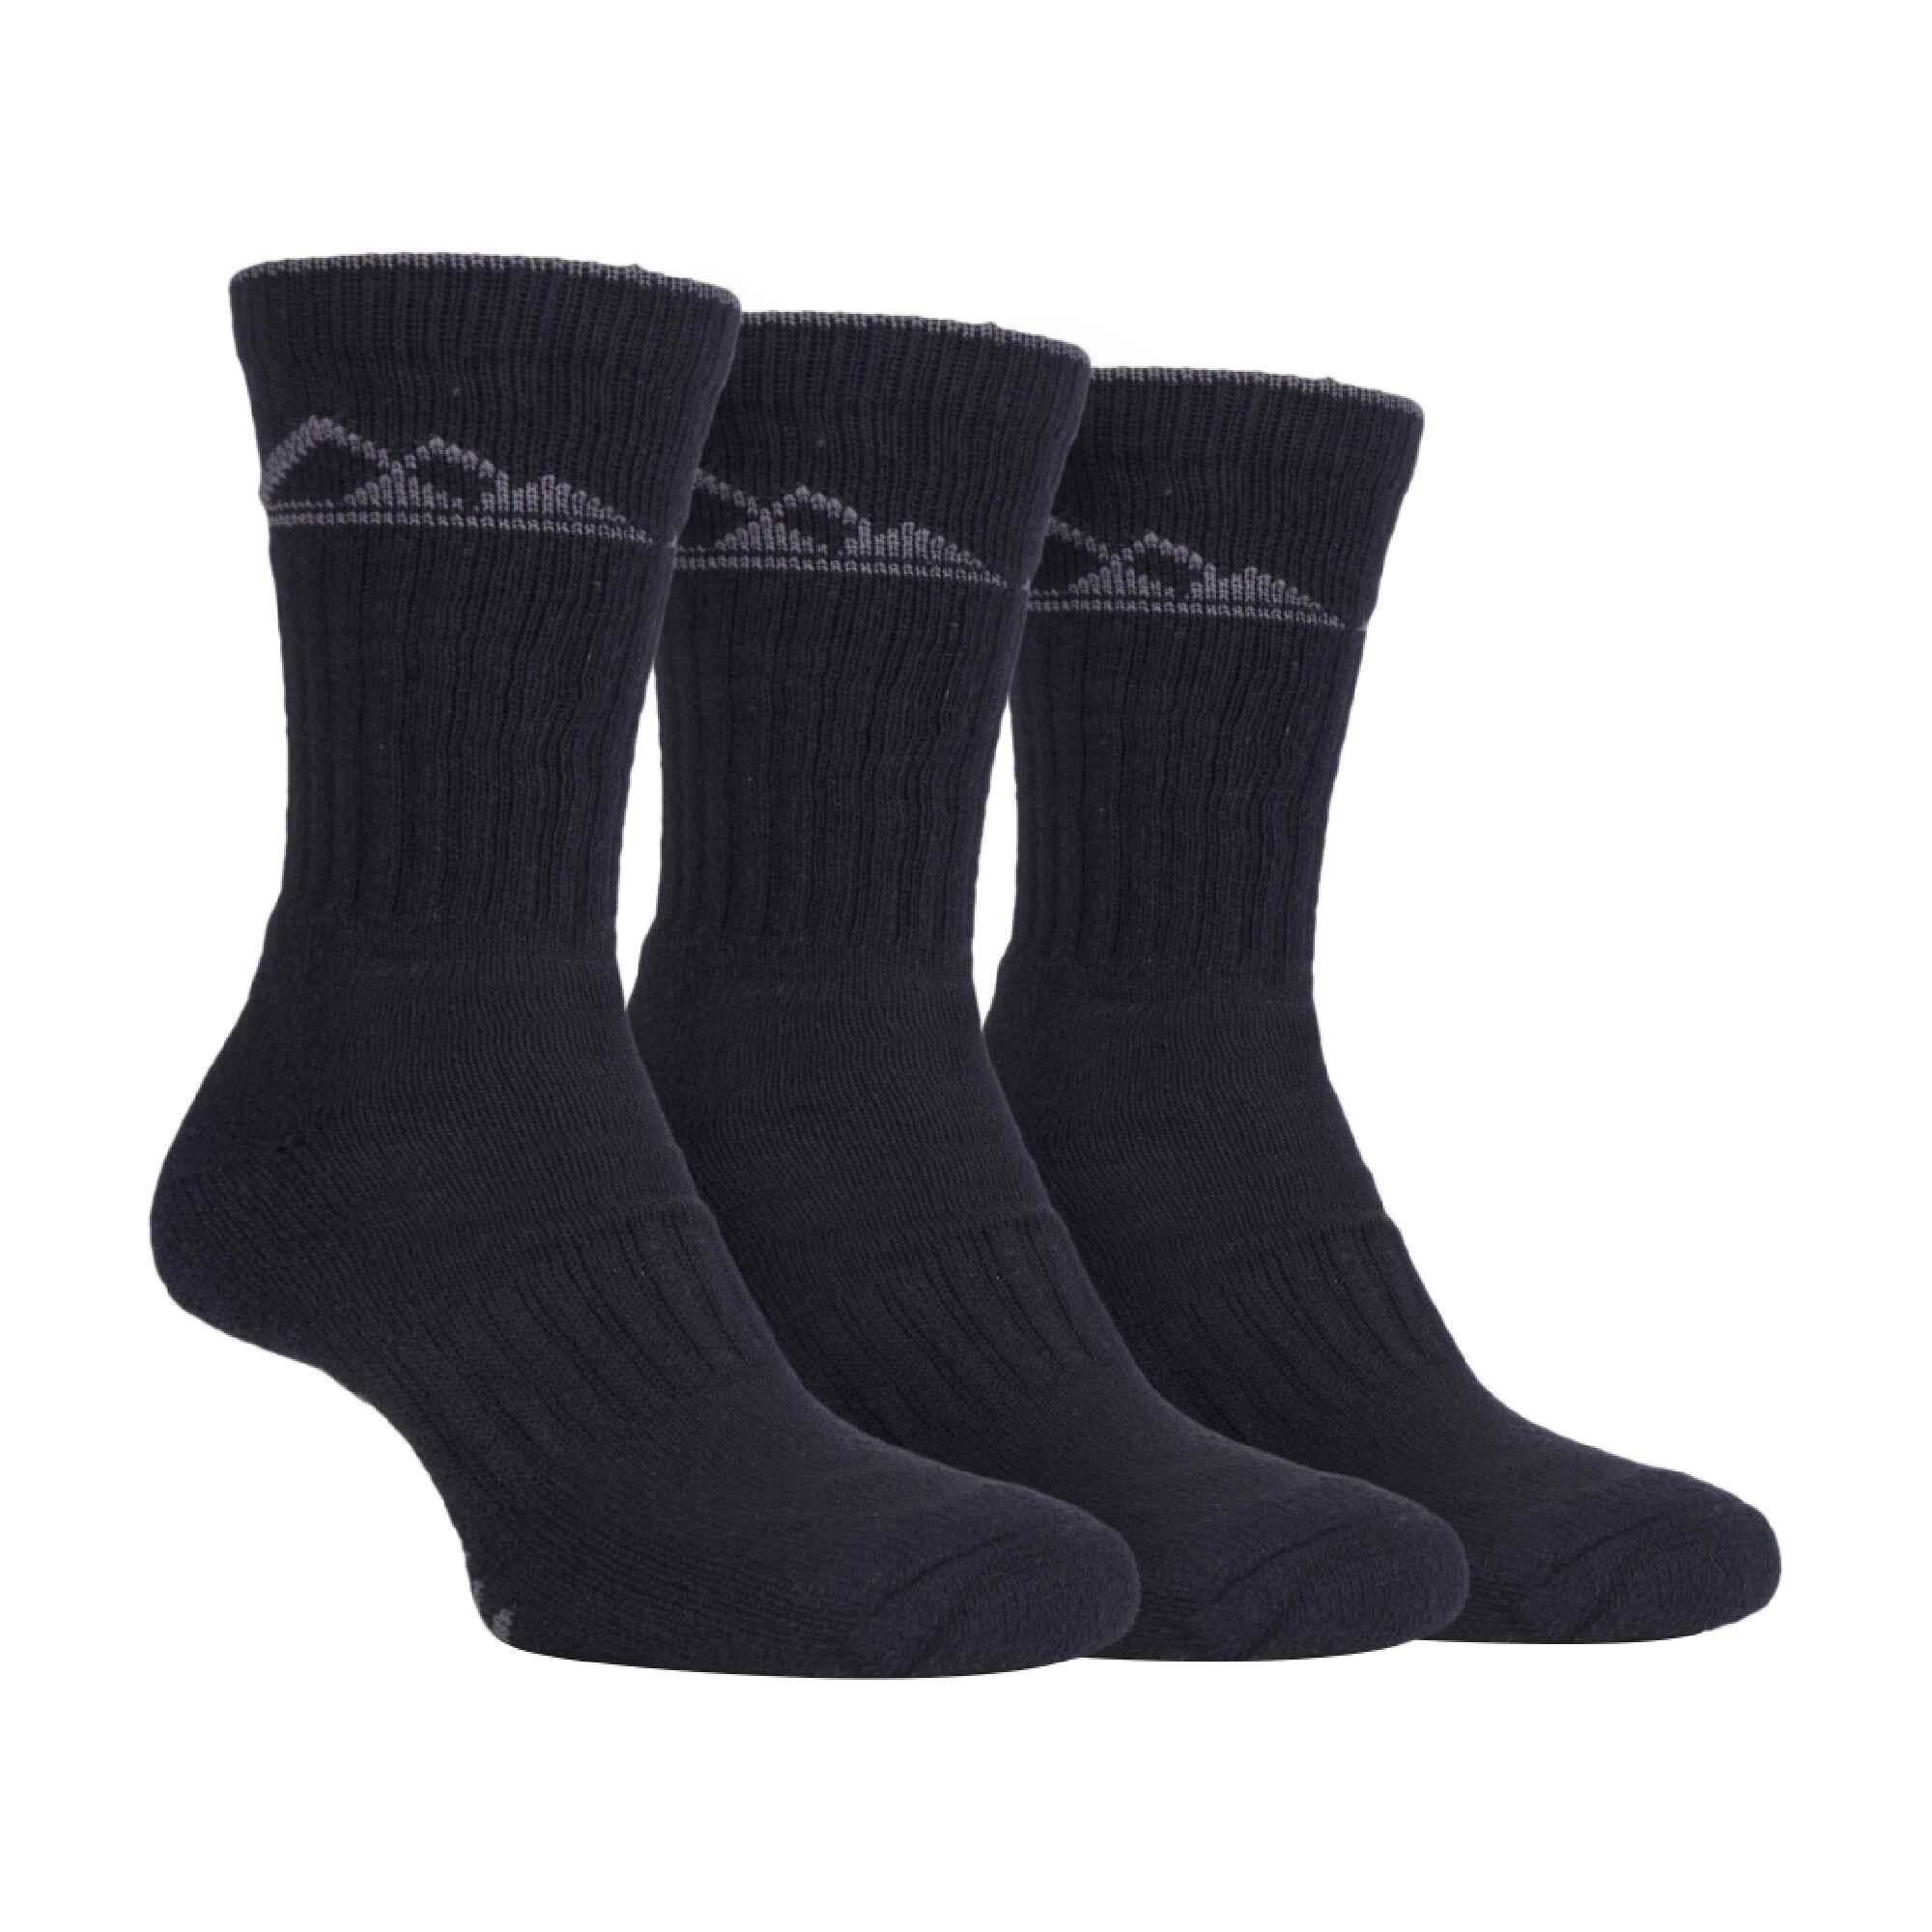 3 Pairs Mens Heavy Cushioned Breathable Outdoor Cotton Hiking Socks 1/6